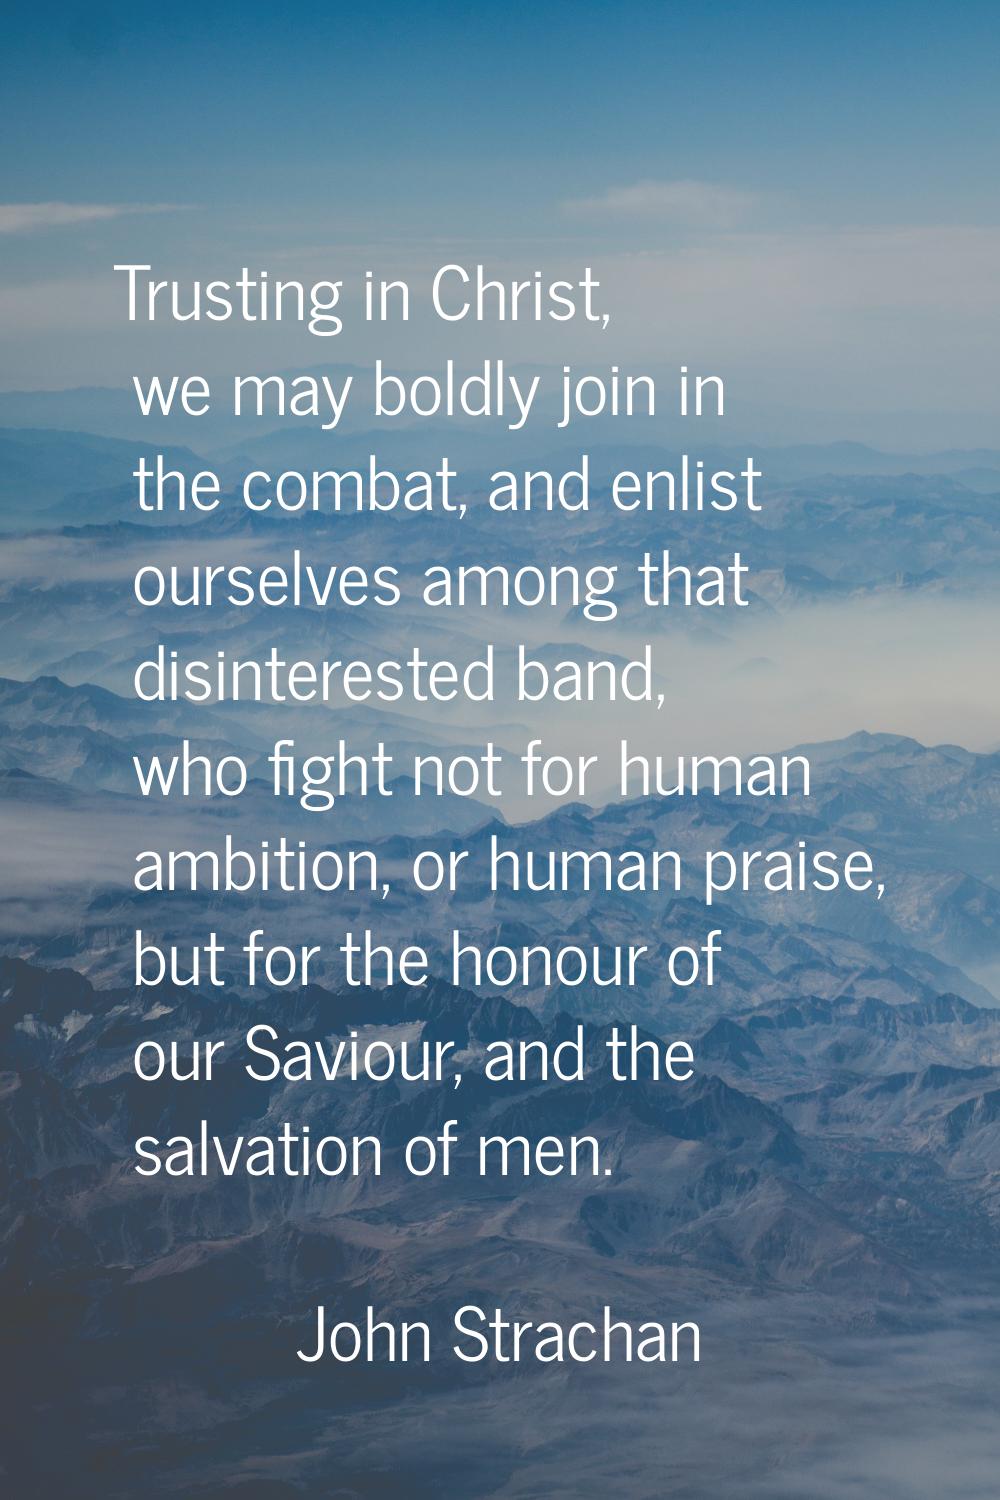 Trusting in Christ, we may boldly join in the combat, and enlist ourselves among that disinterested